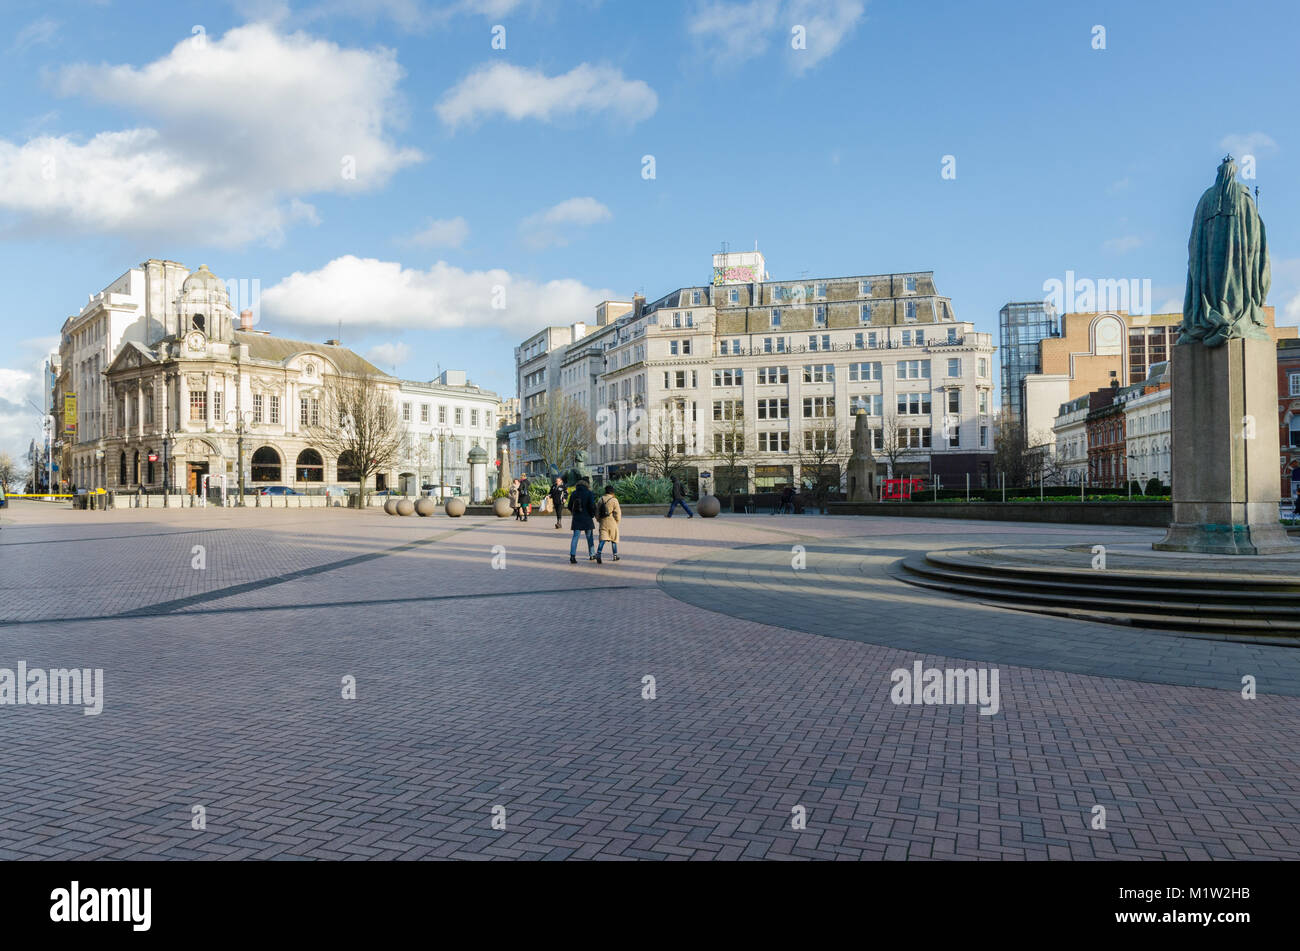 The large open space of Victoria Square in Birmingham city centre Stock Photo